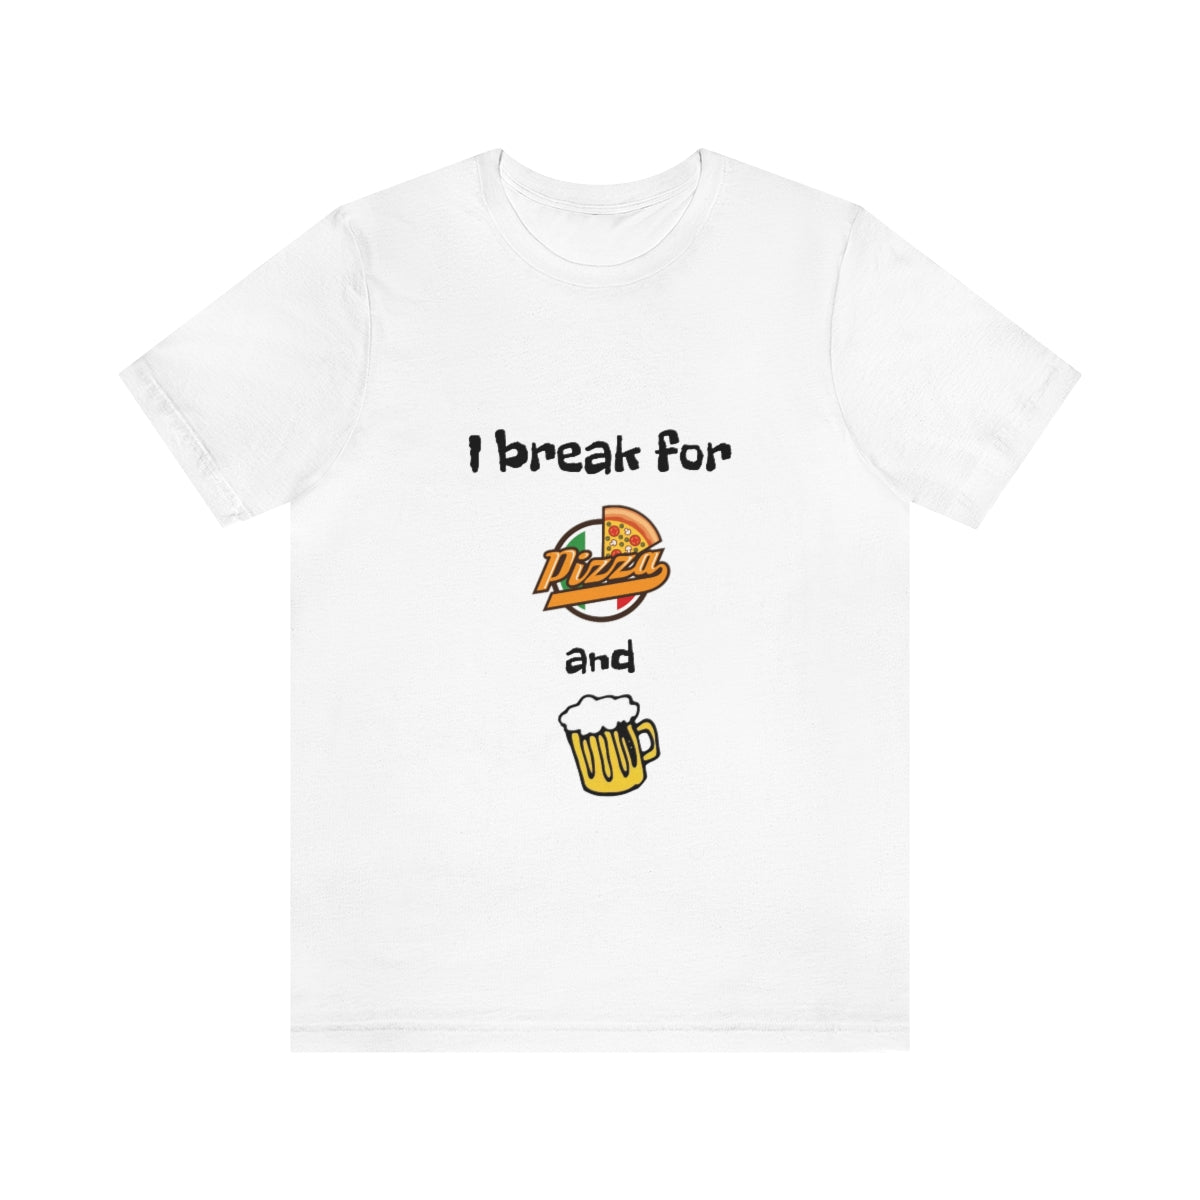 I break for pizza and beer - Funny - Unisex Short Sleeve Tee - CrazyTomTShirts